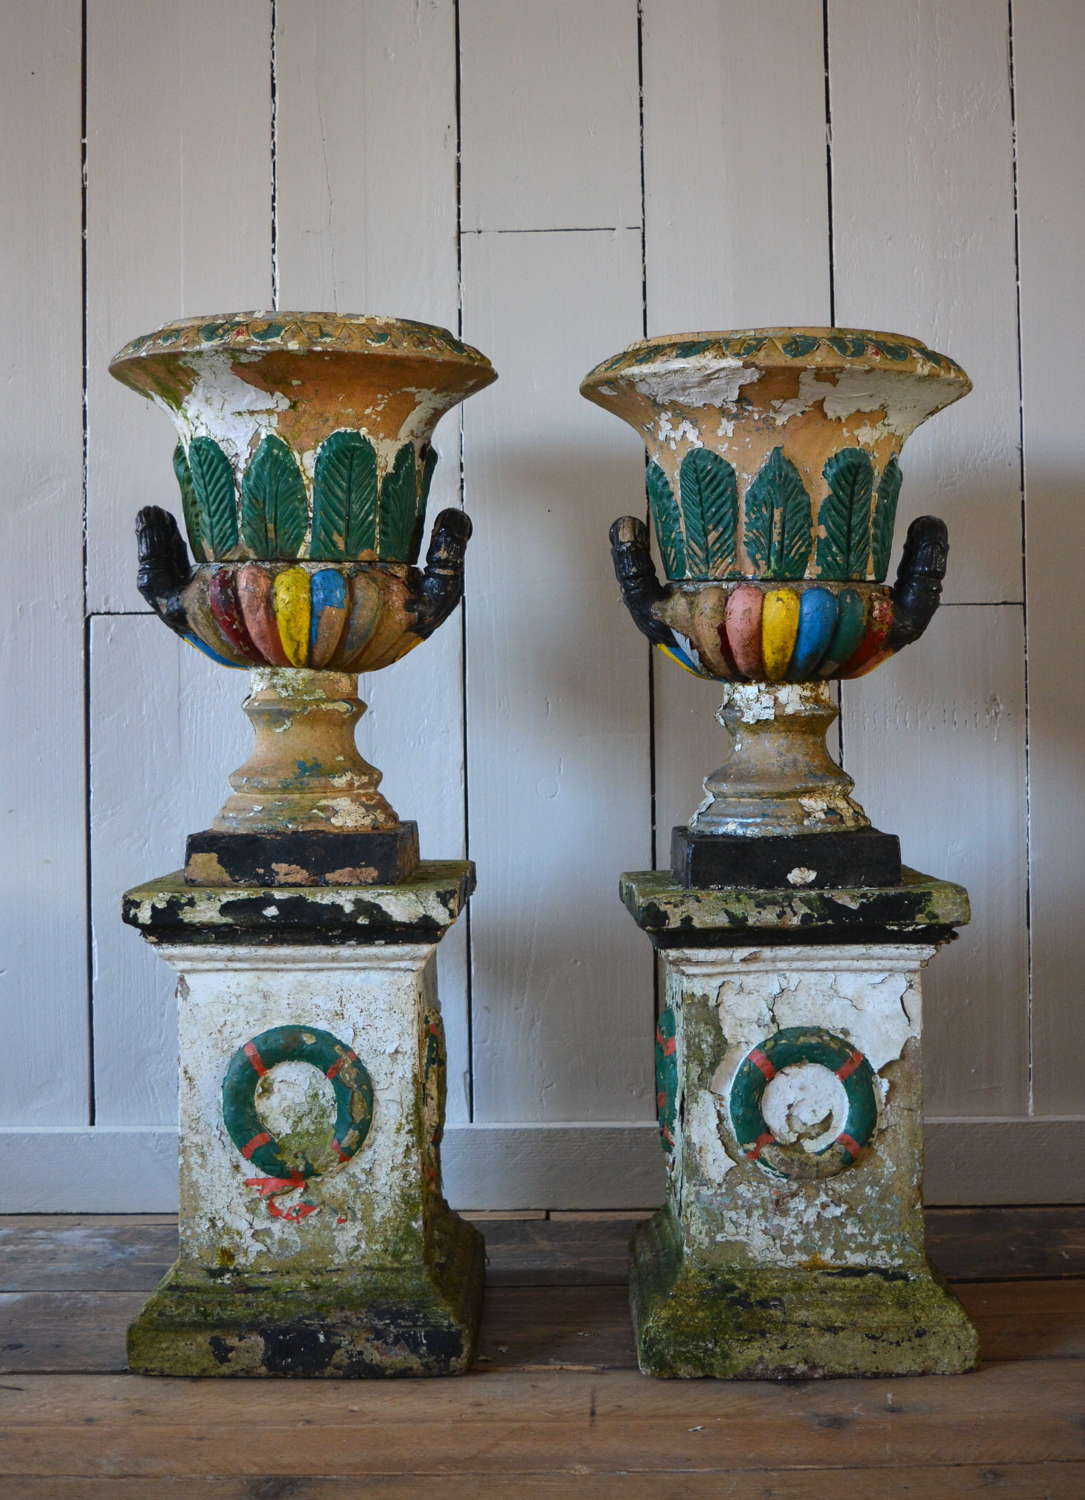 NAPOLEAN 3RD COADE STONE PAINTED URNS CIRCA 1860